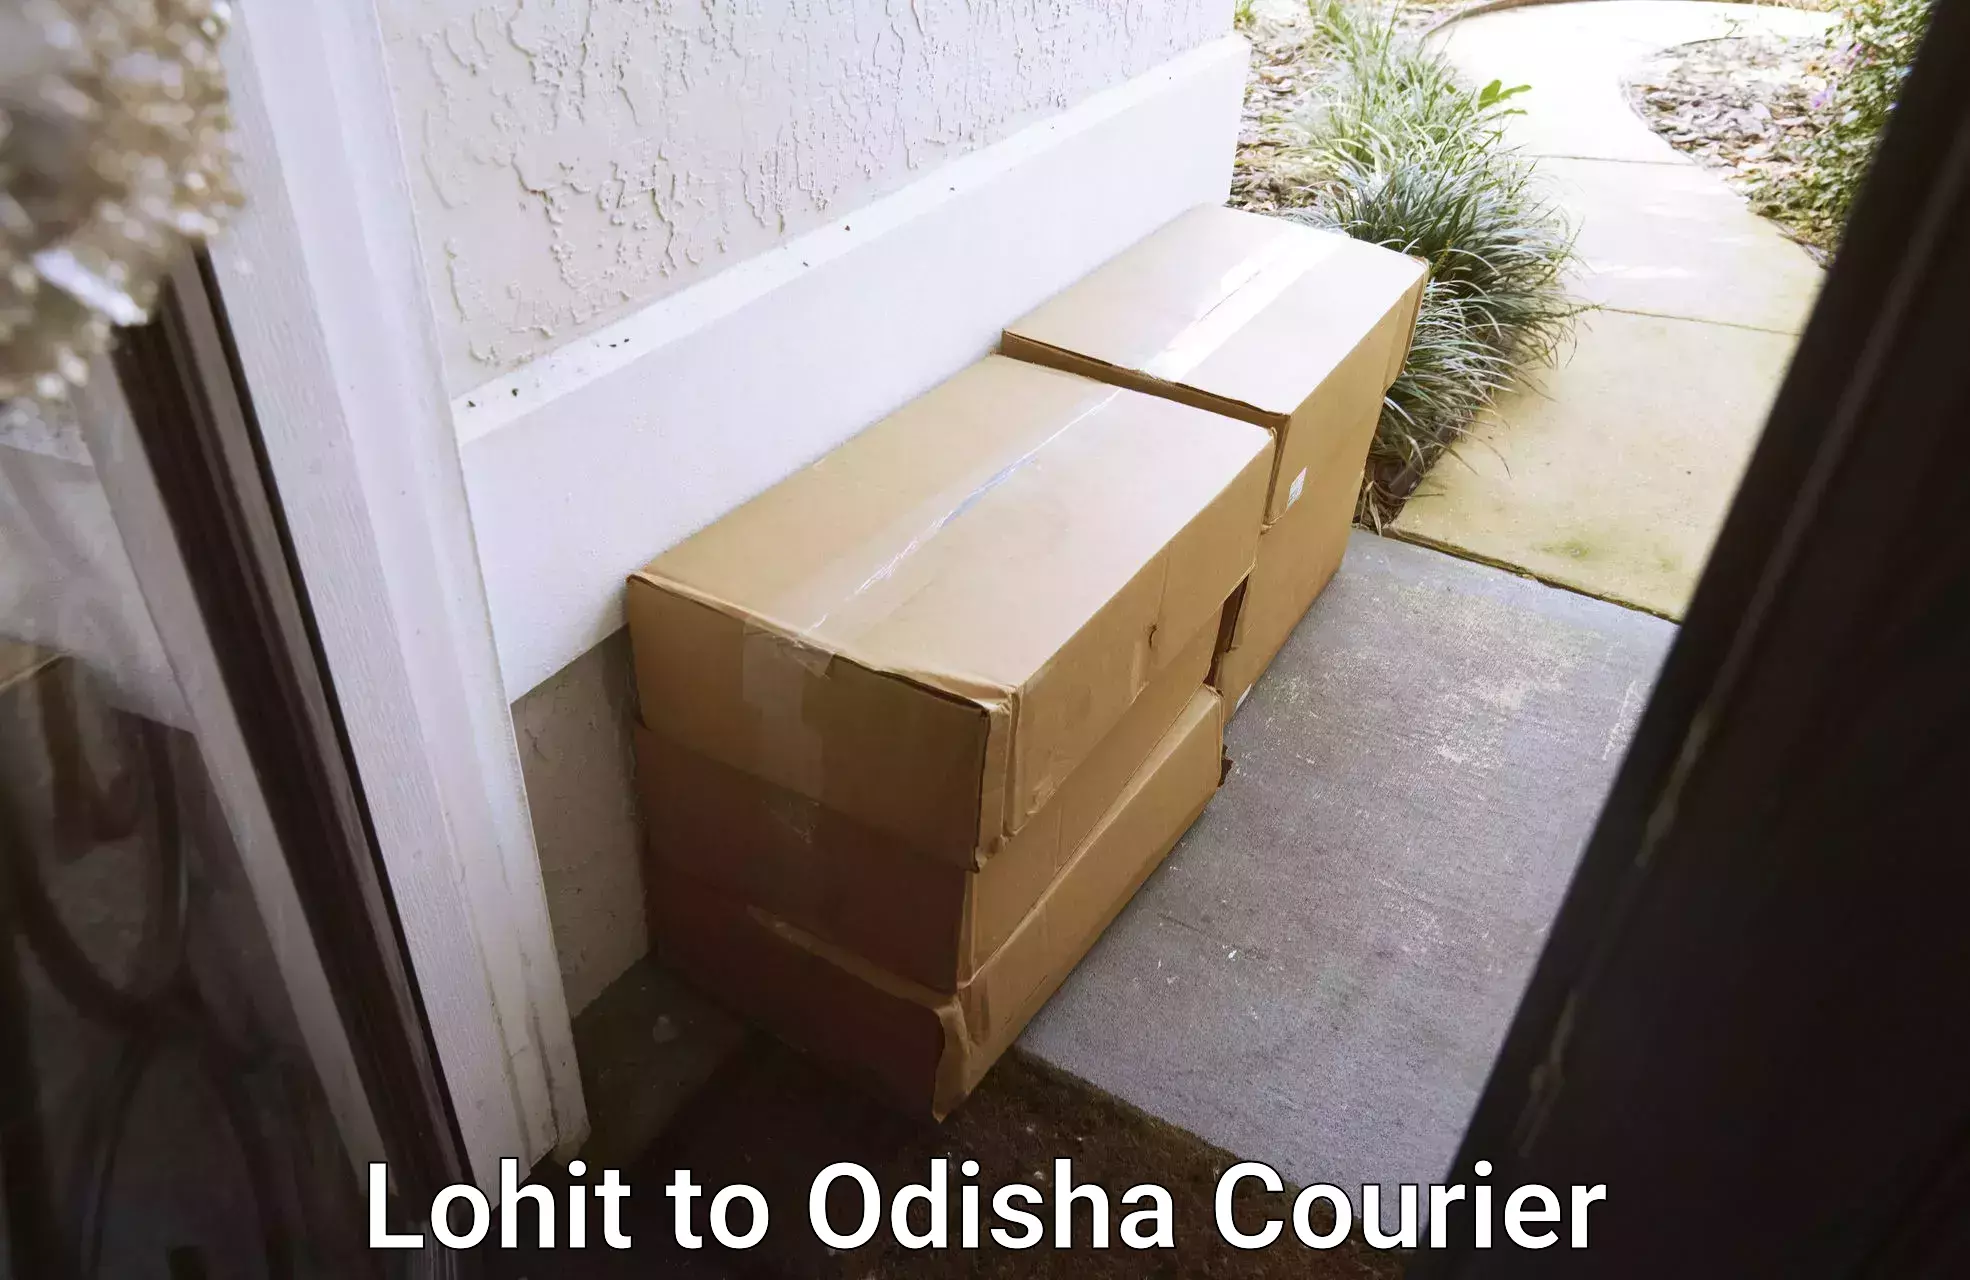 Delivery service partnership in Lohit to Odisha